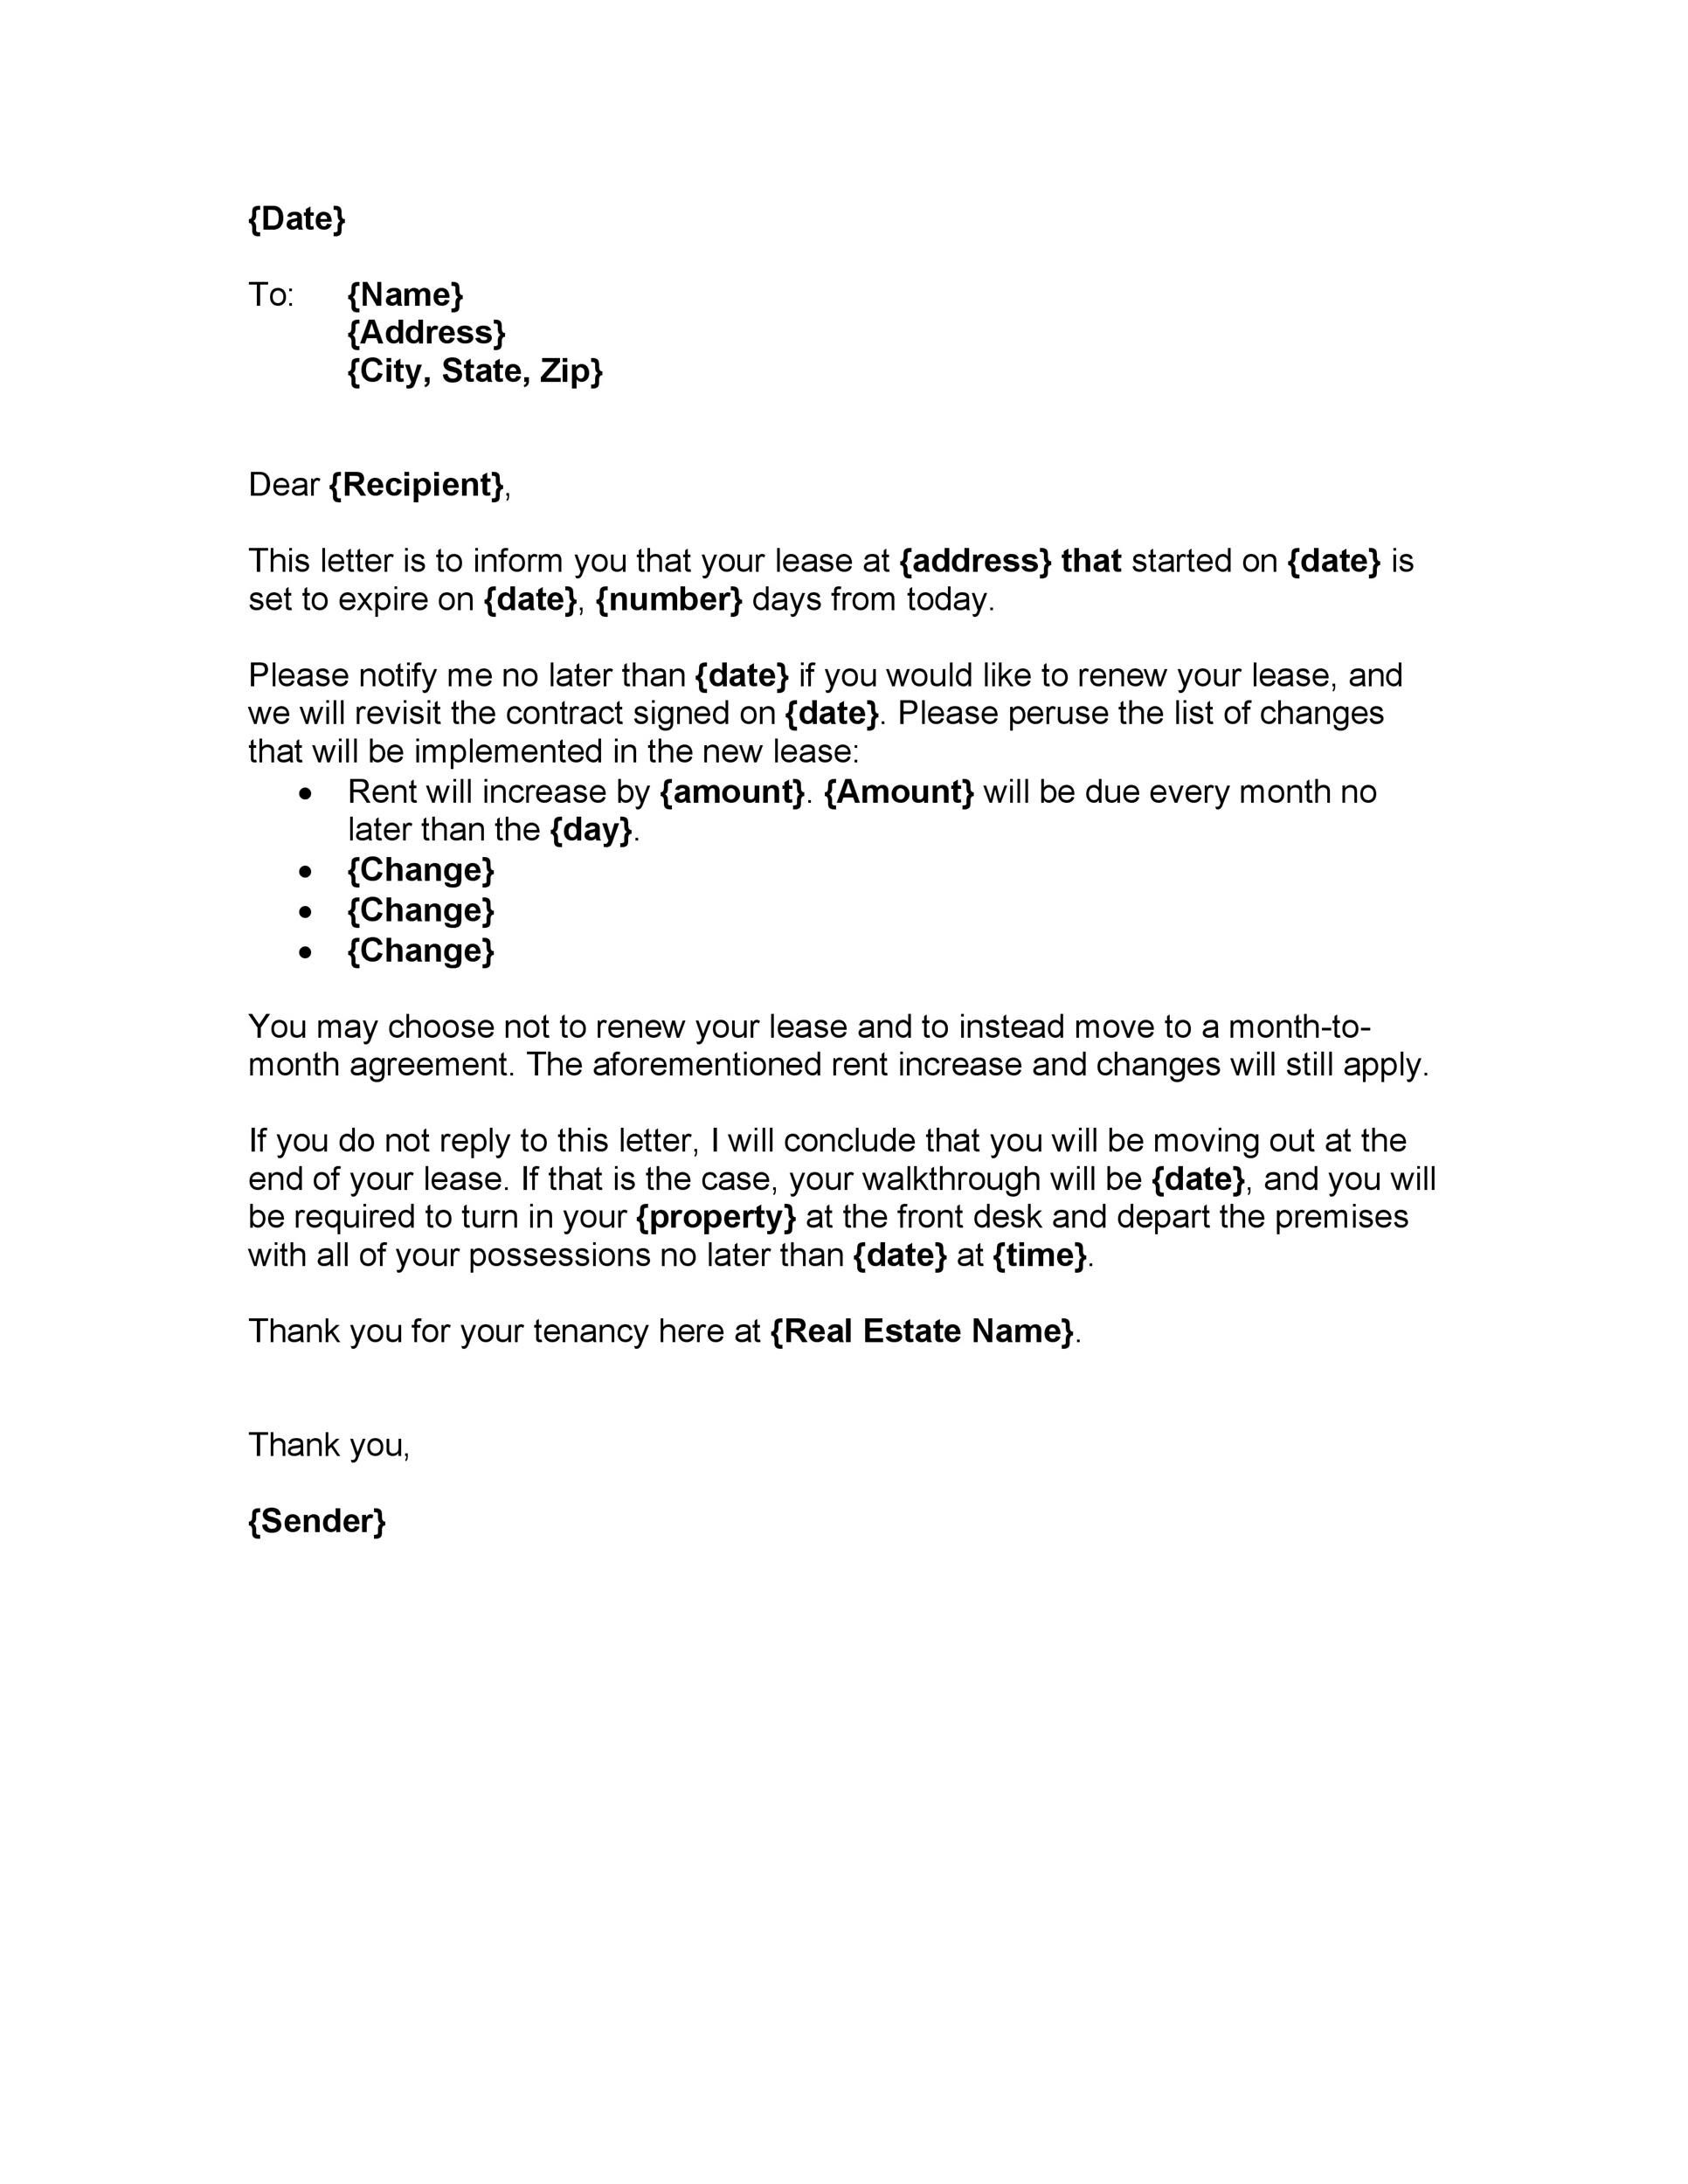 tenant-not-renewing-lease-letter-for-your-needs-letter-template